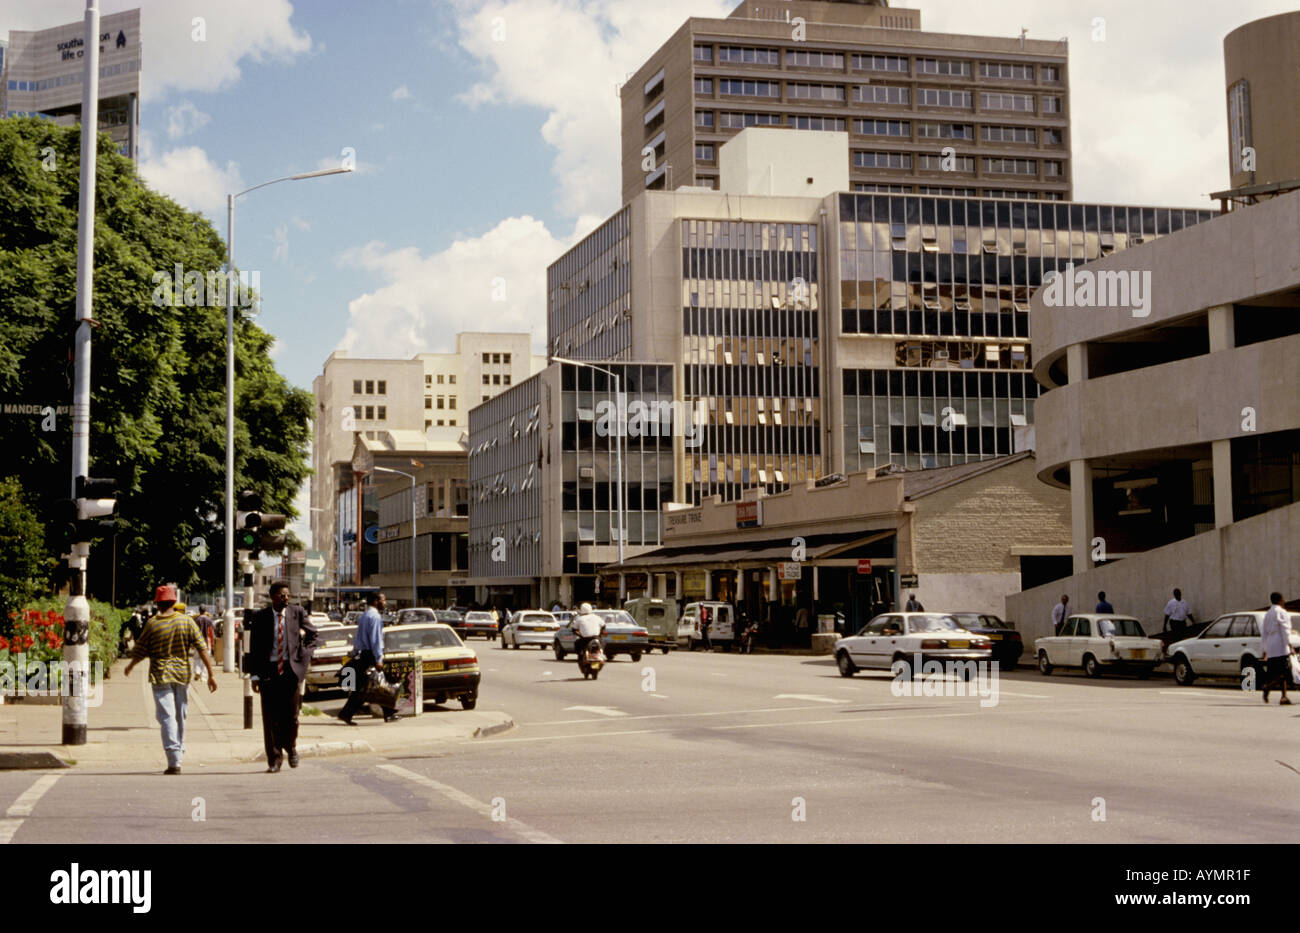 Typical city street scene in the capital city of Harare, Zimbabwe, East Africa Stock Photo